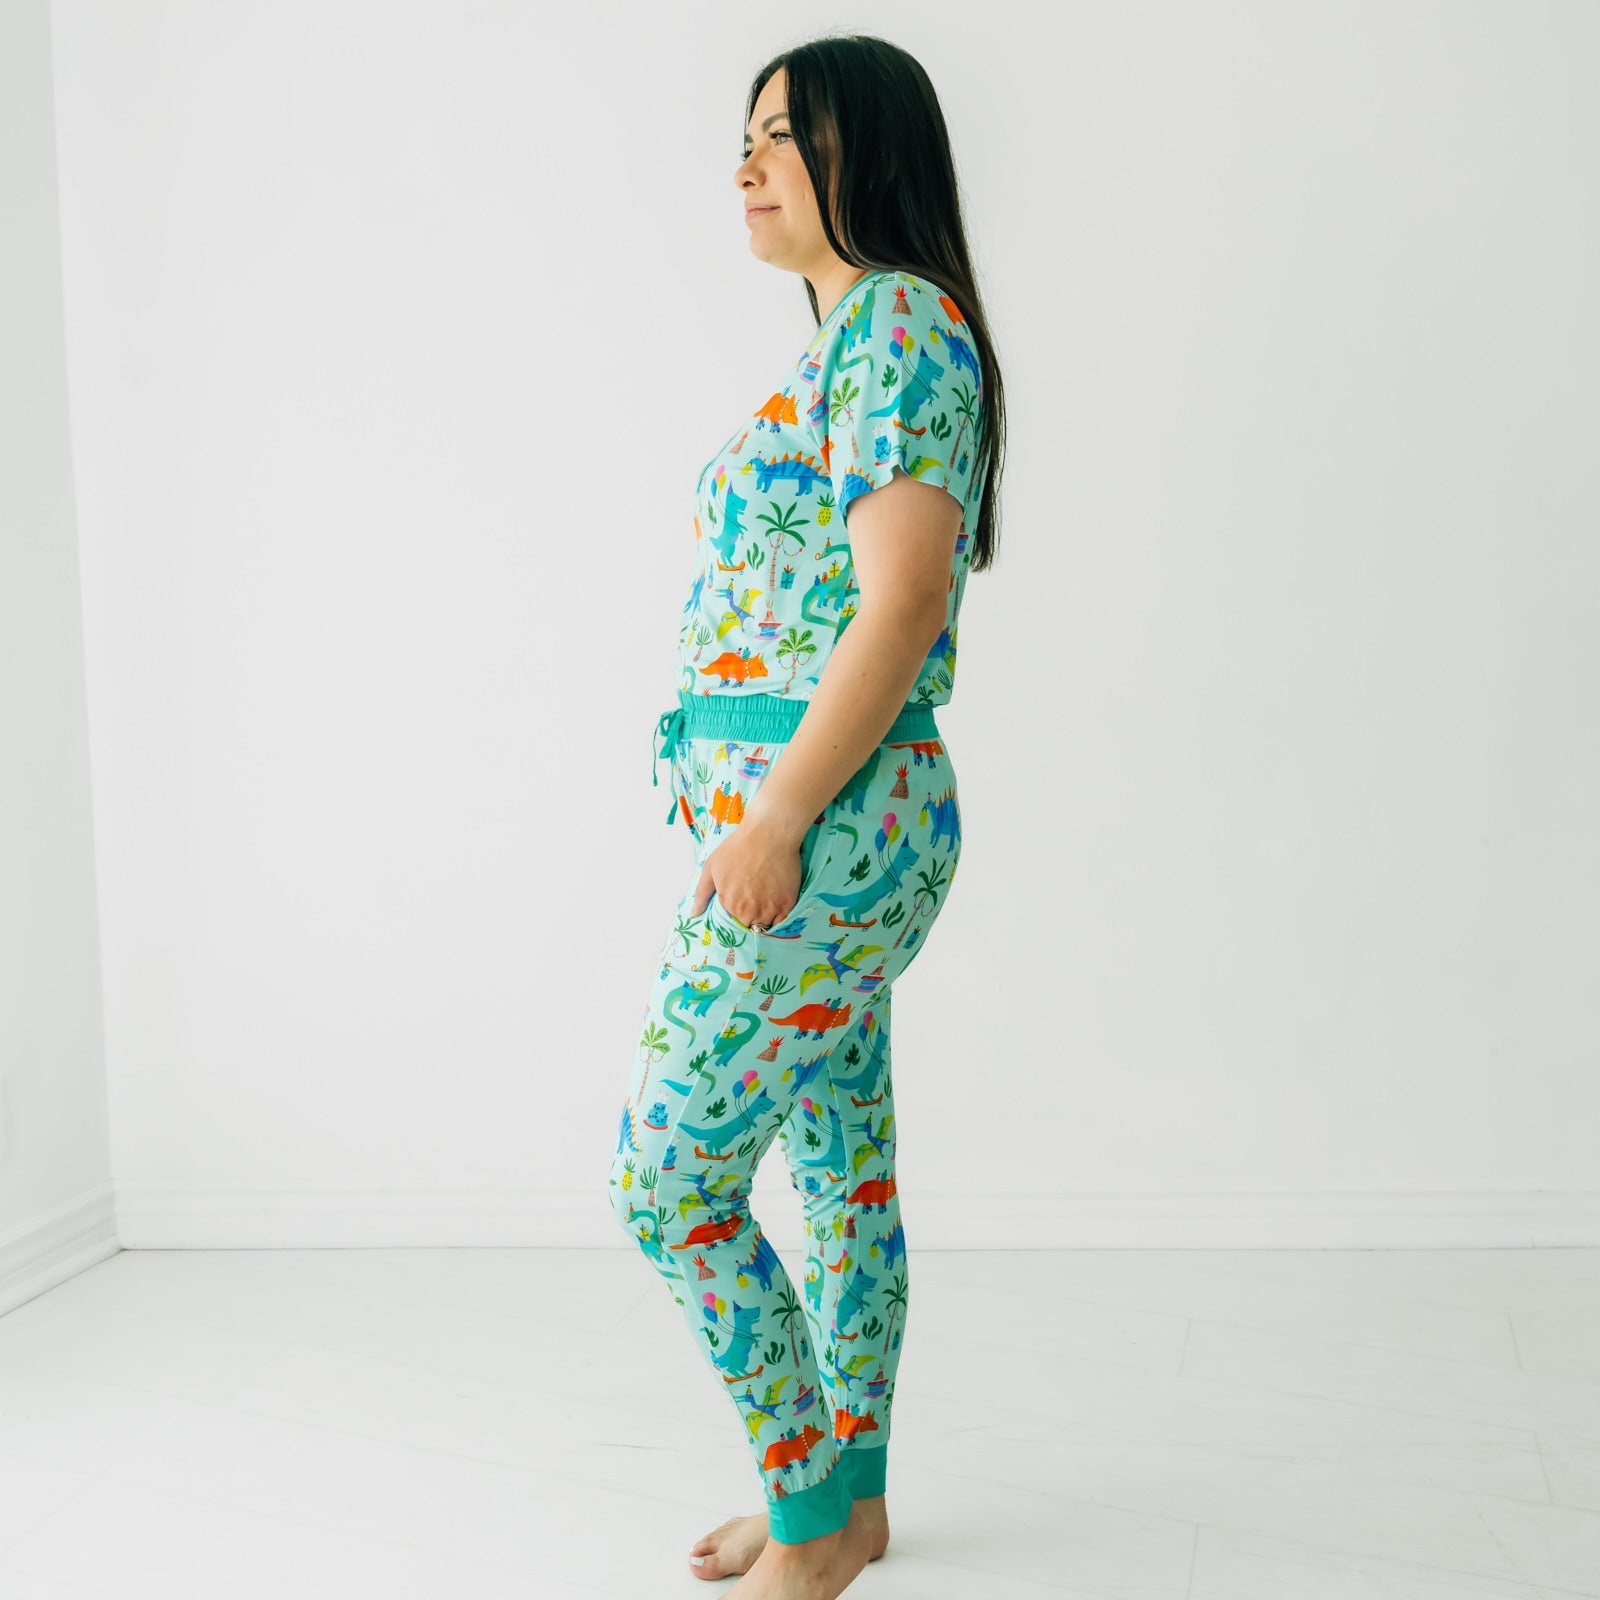 Profile image of a woman wearing Prehistoric Party women's pj pants and matching pj top